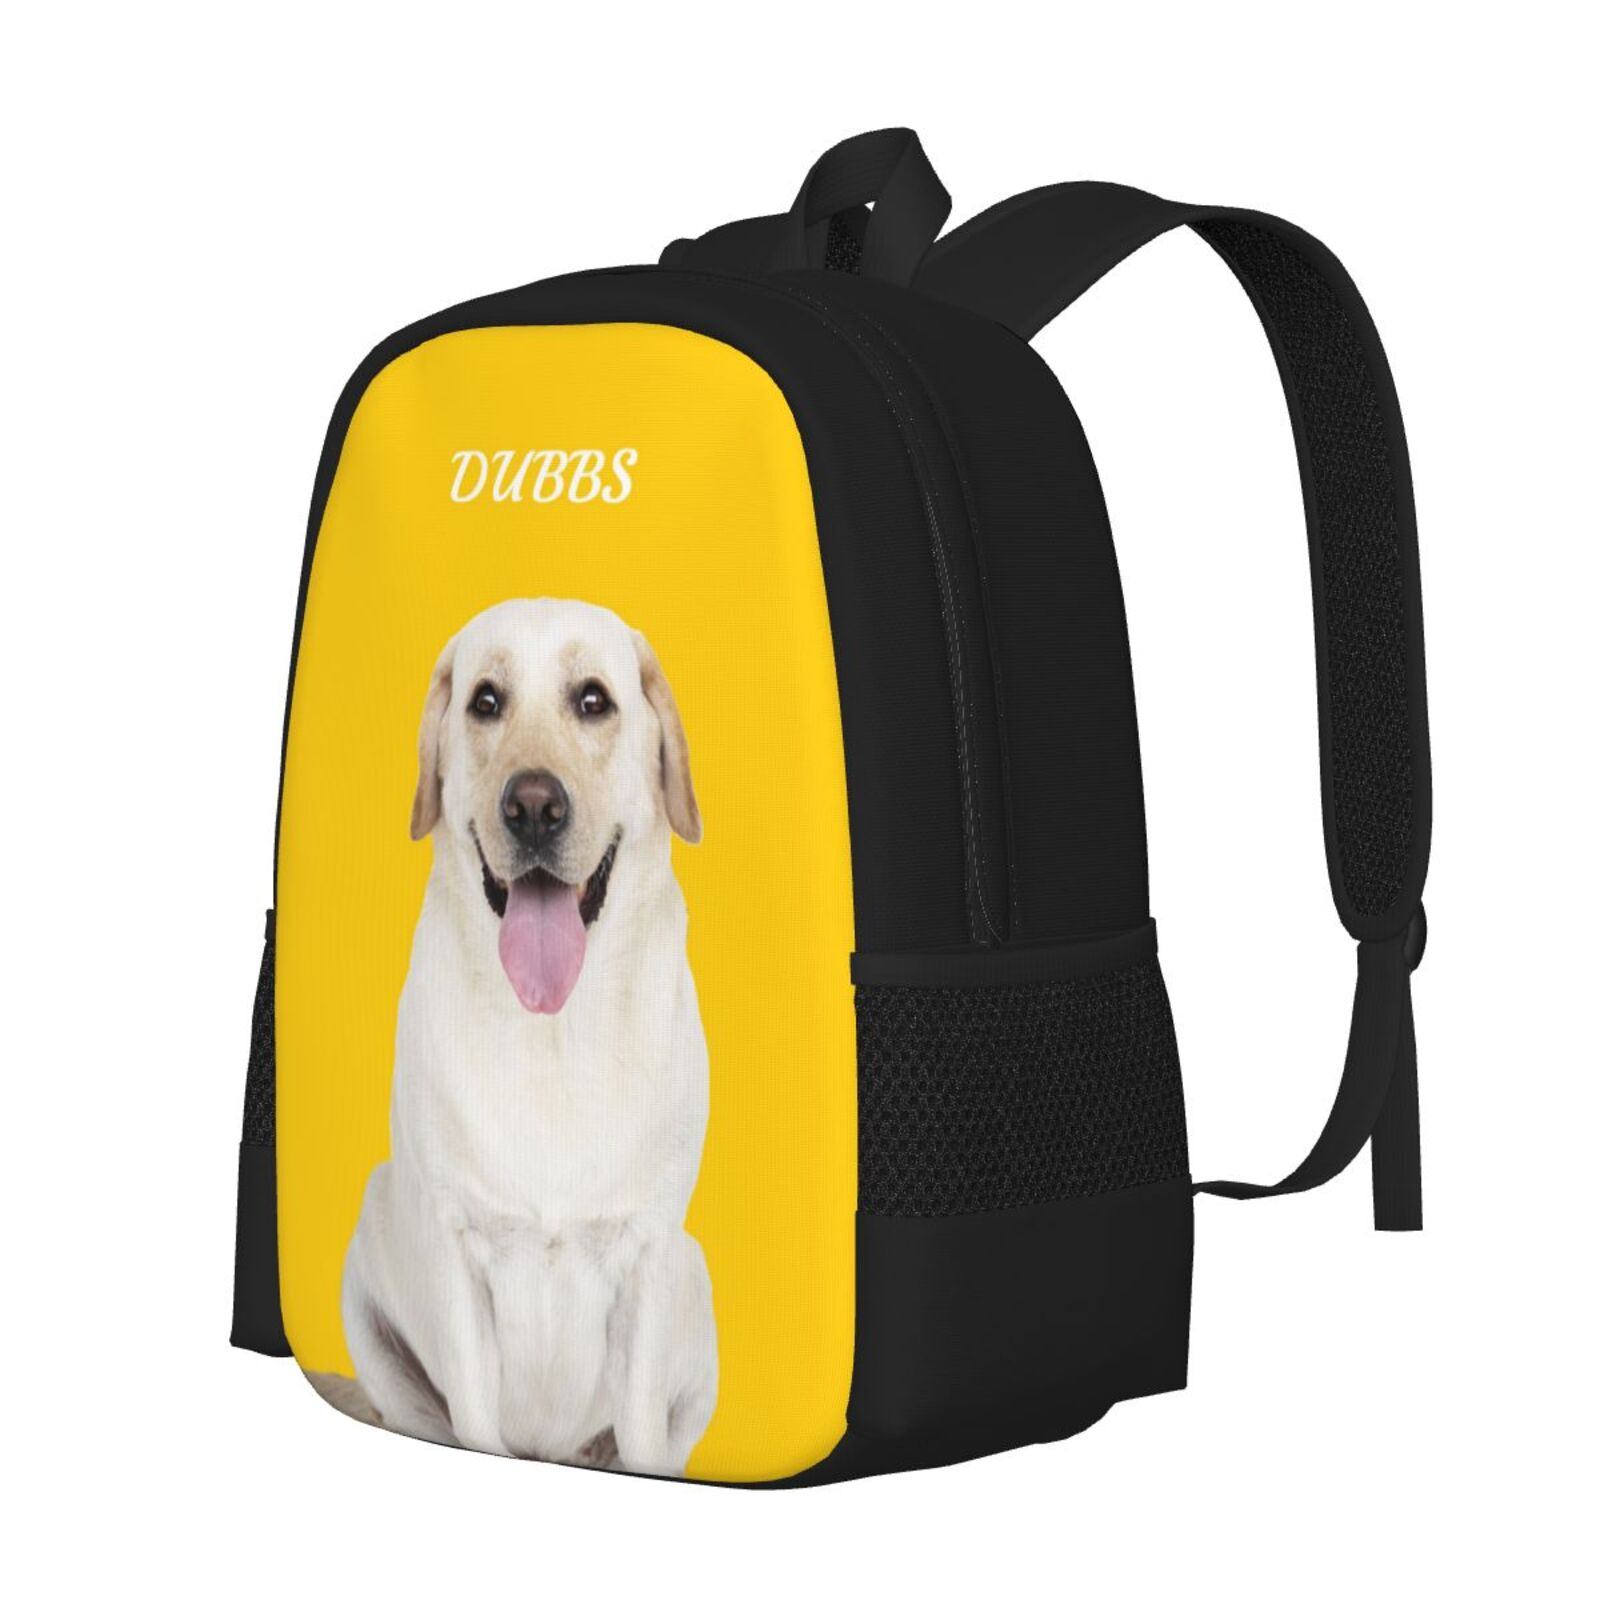 Custom Dog Backpack With Text